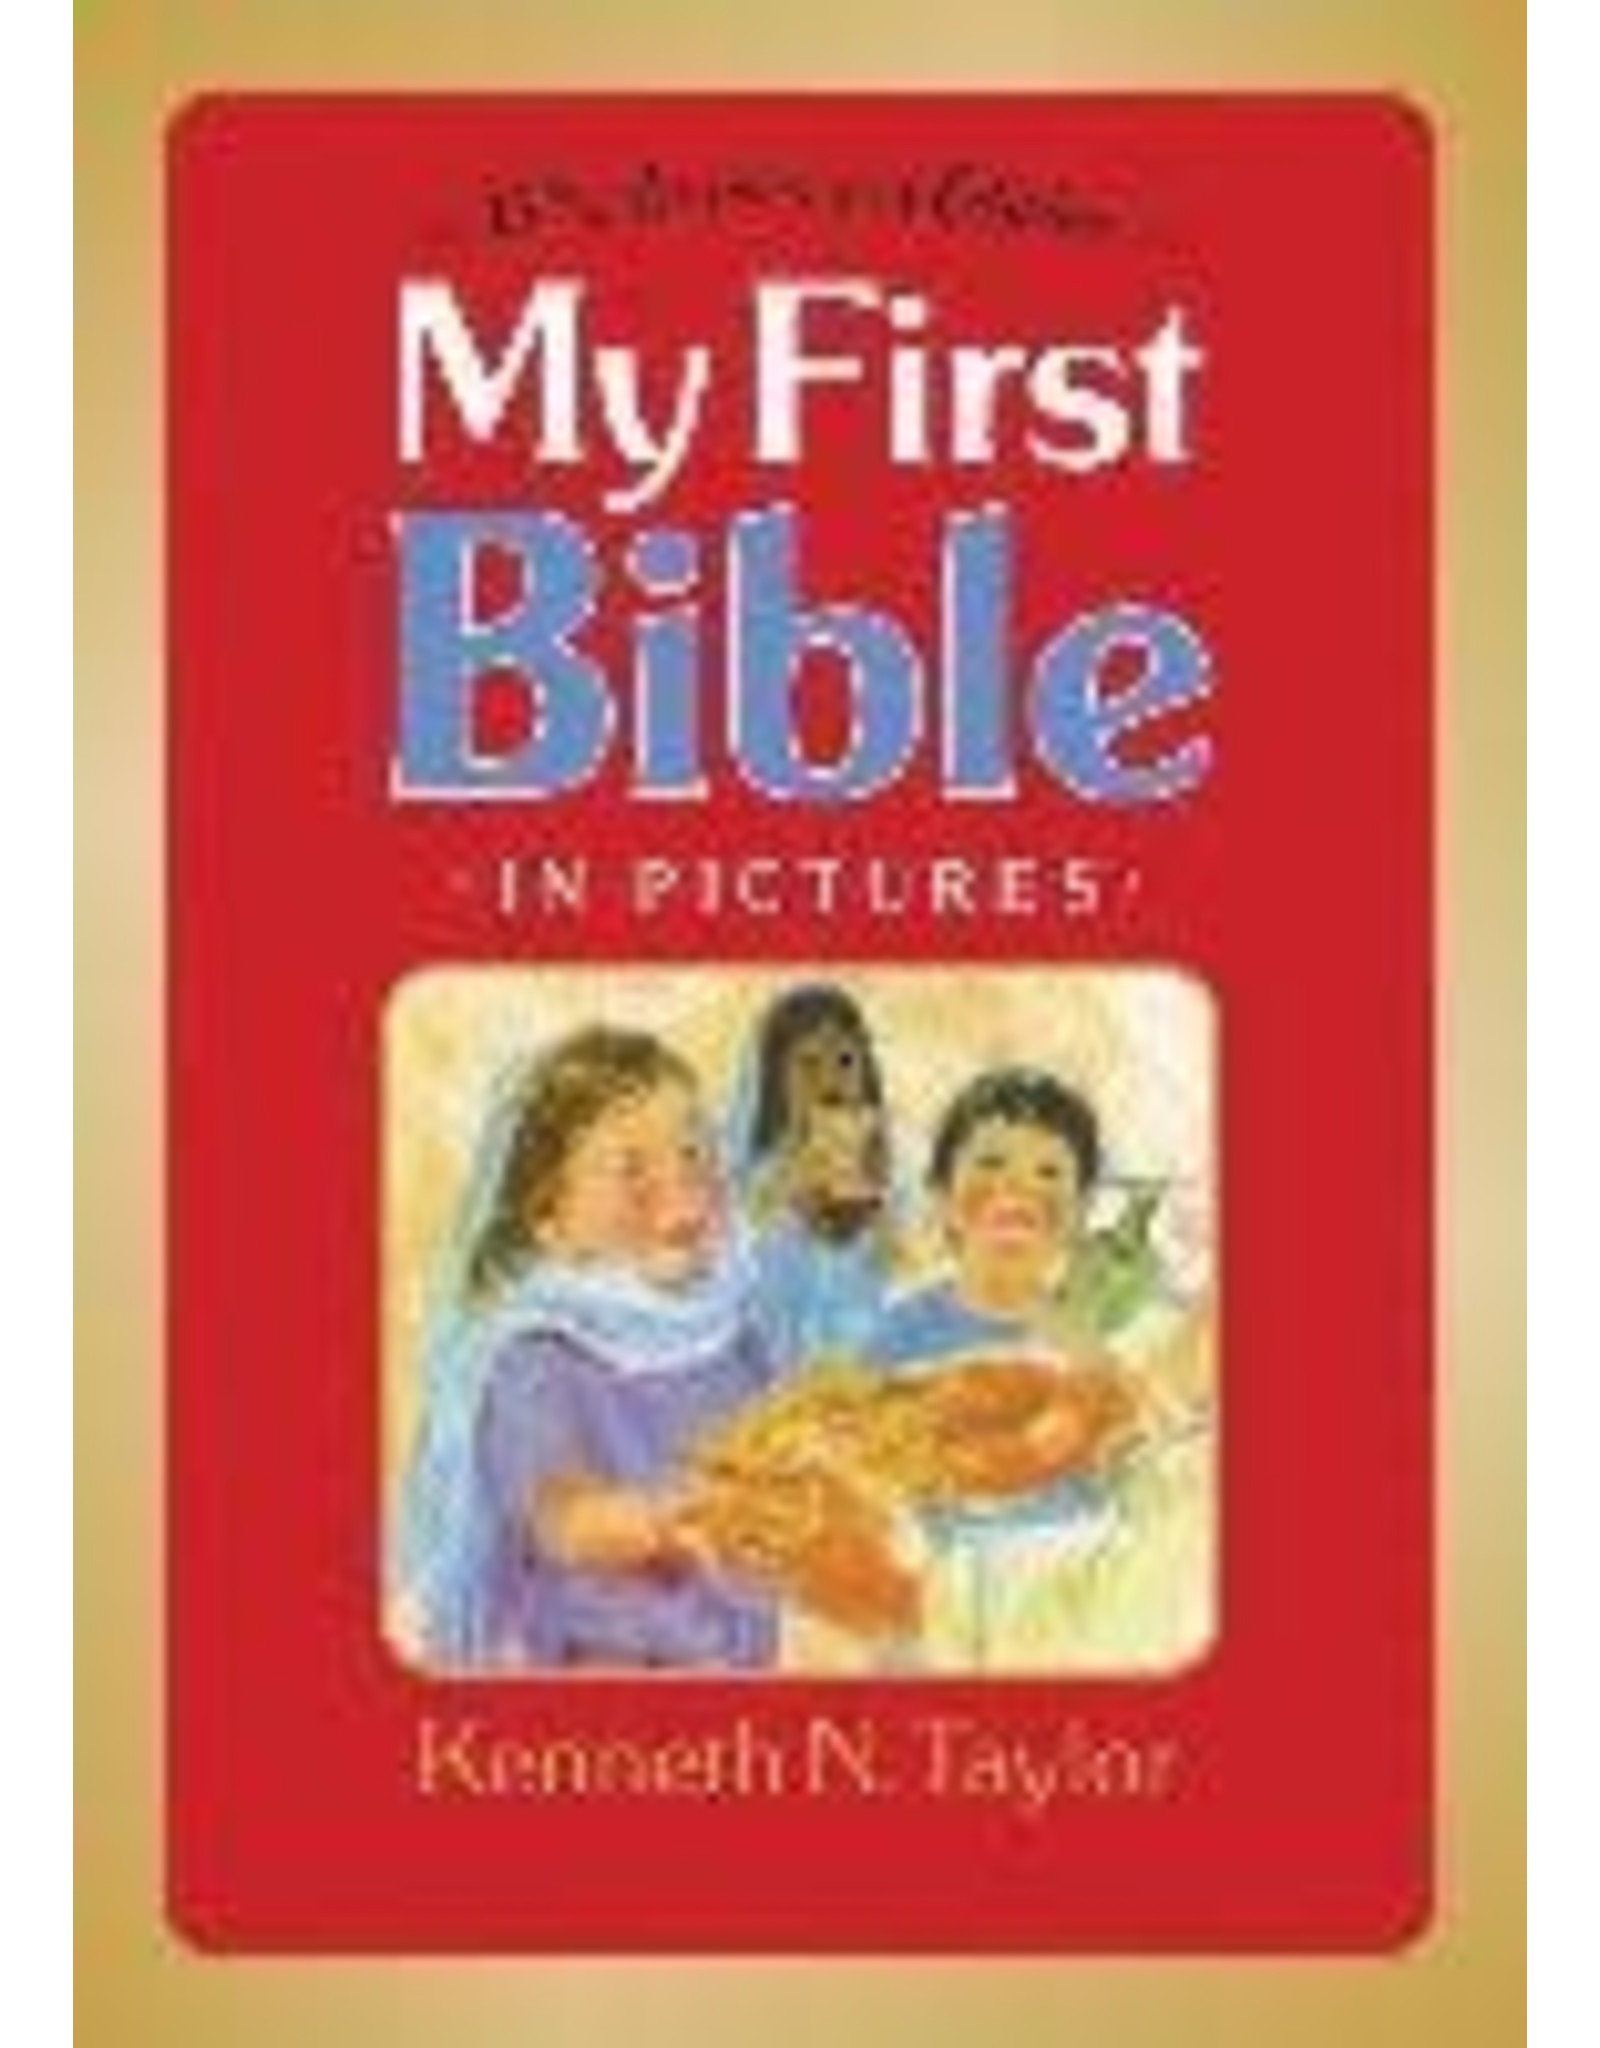 My First Bible in Pictures 15th Anniversary Edition